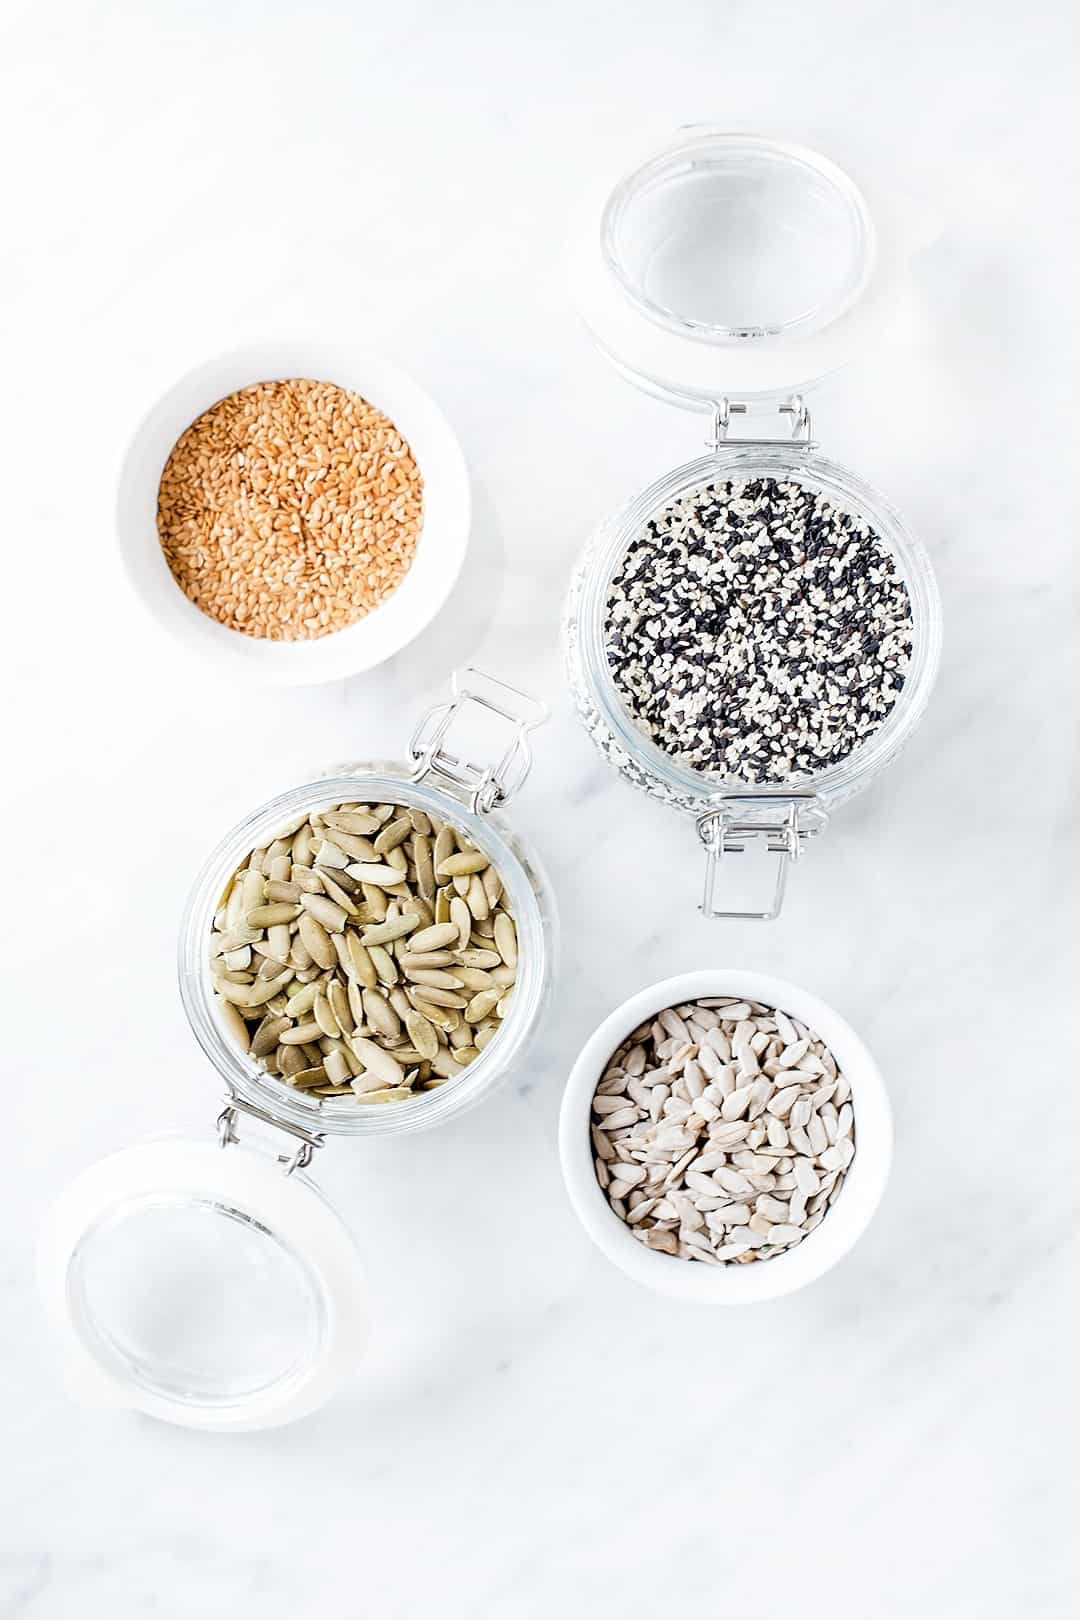 Birds eye view of various seeds in jars for seed cycling.